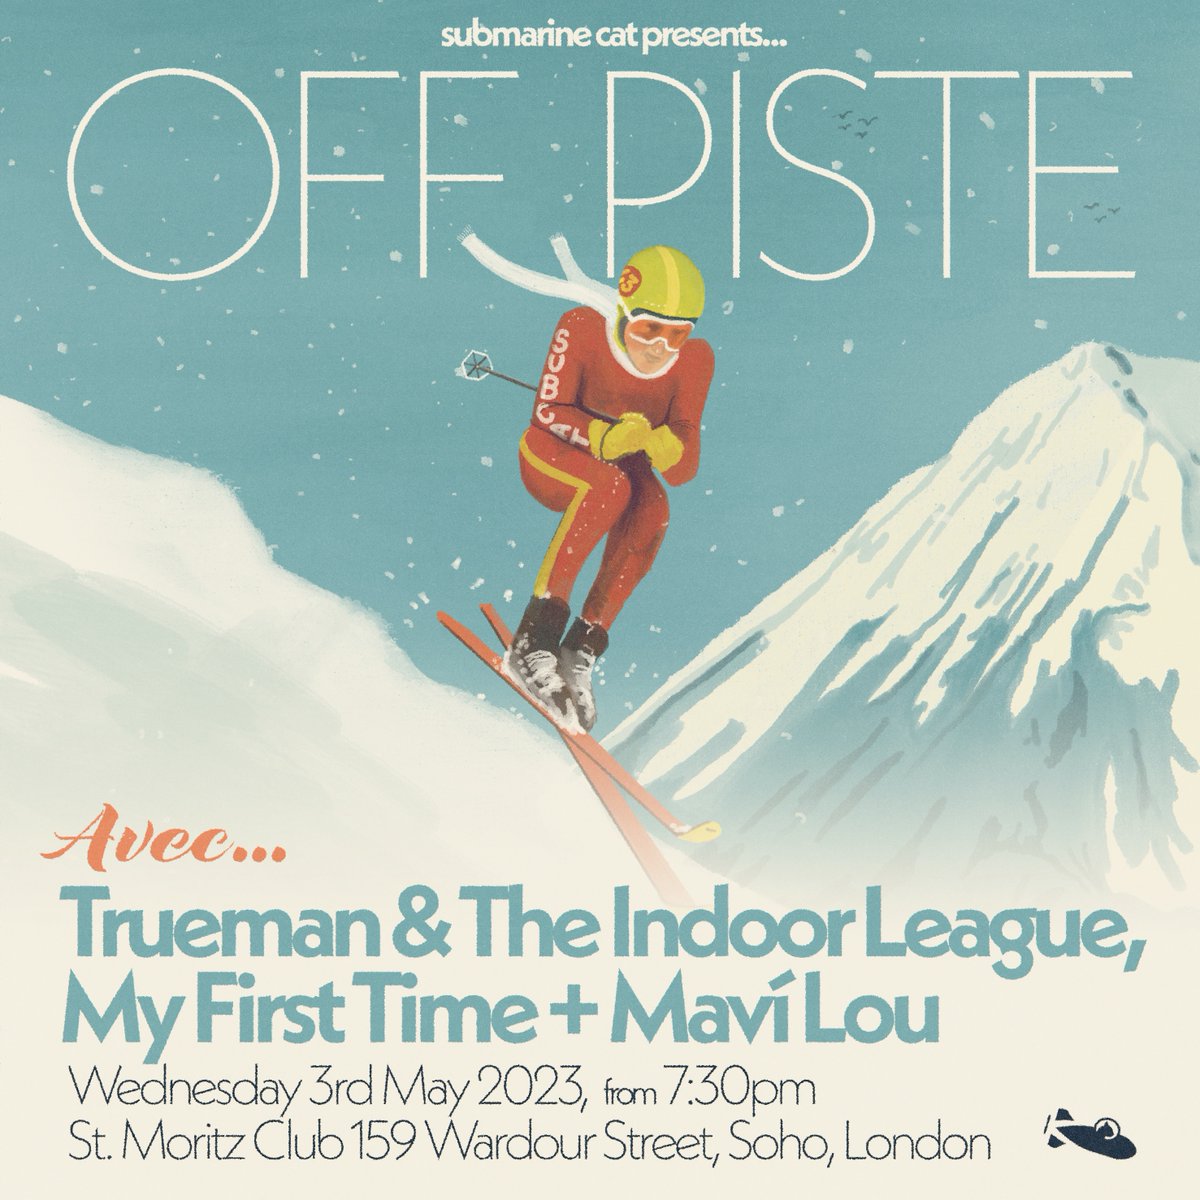 ⛷Absolutely over the moon to announce our second OFF PISTE! Wednesday 3rd May - see you at St. Moritz Club in Soho! 🕺🏻FREE ENTRY So excited to see these amazing bands live @theindoorleague , My First Time and Maví Lou!